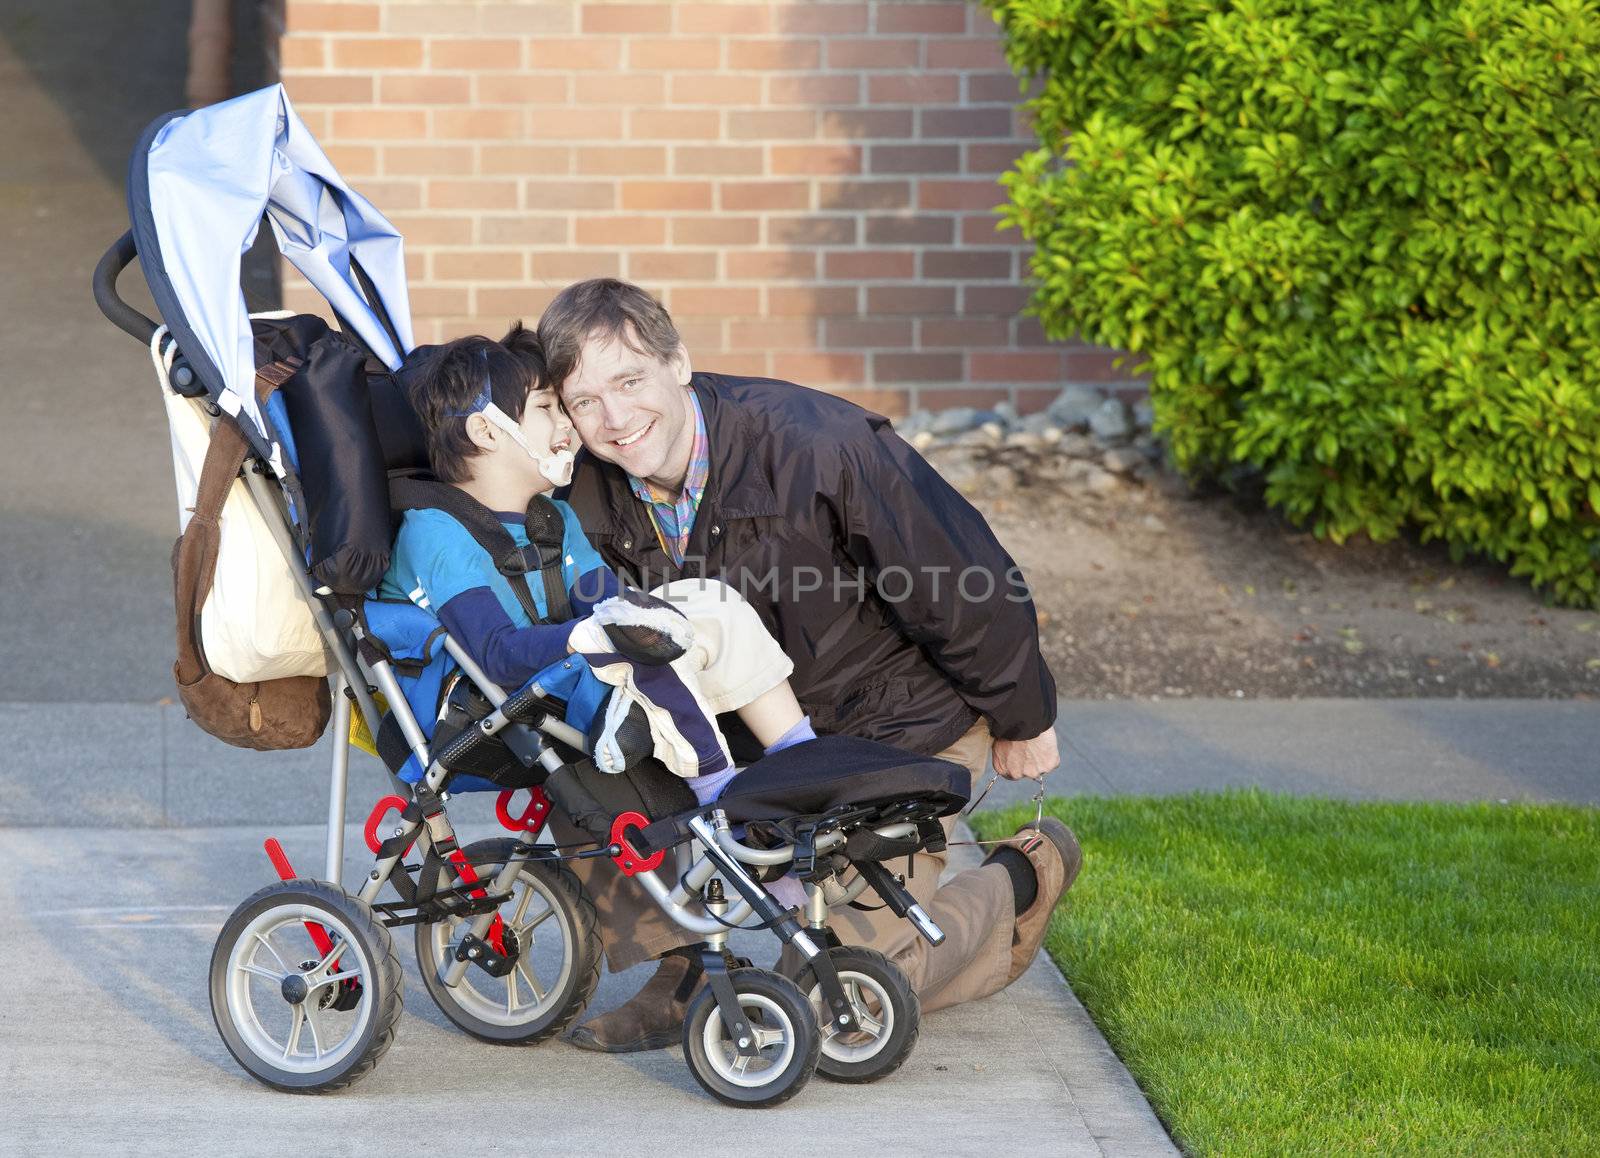 Disabled boy in wheelchair and his caretaker by jarenwicklund